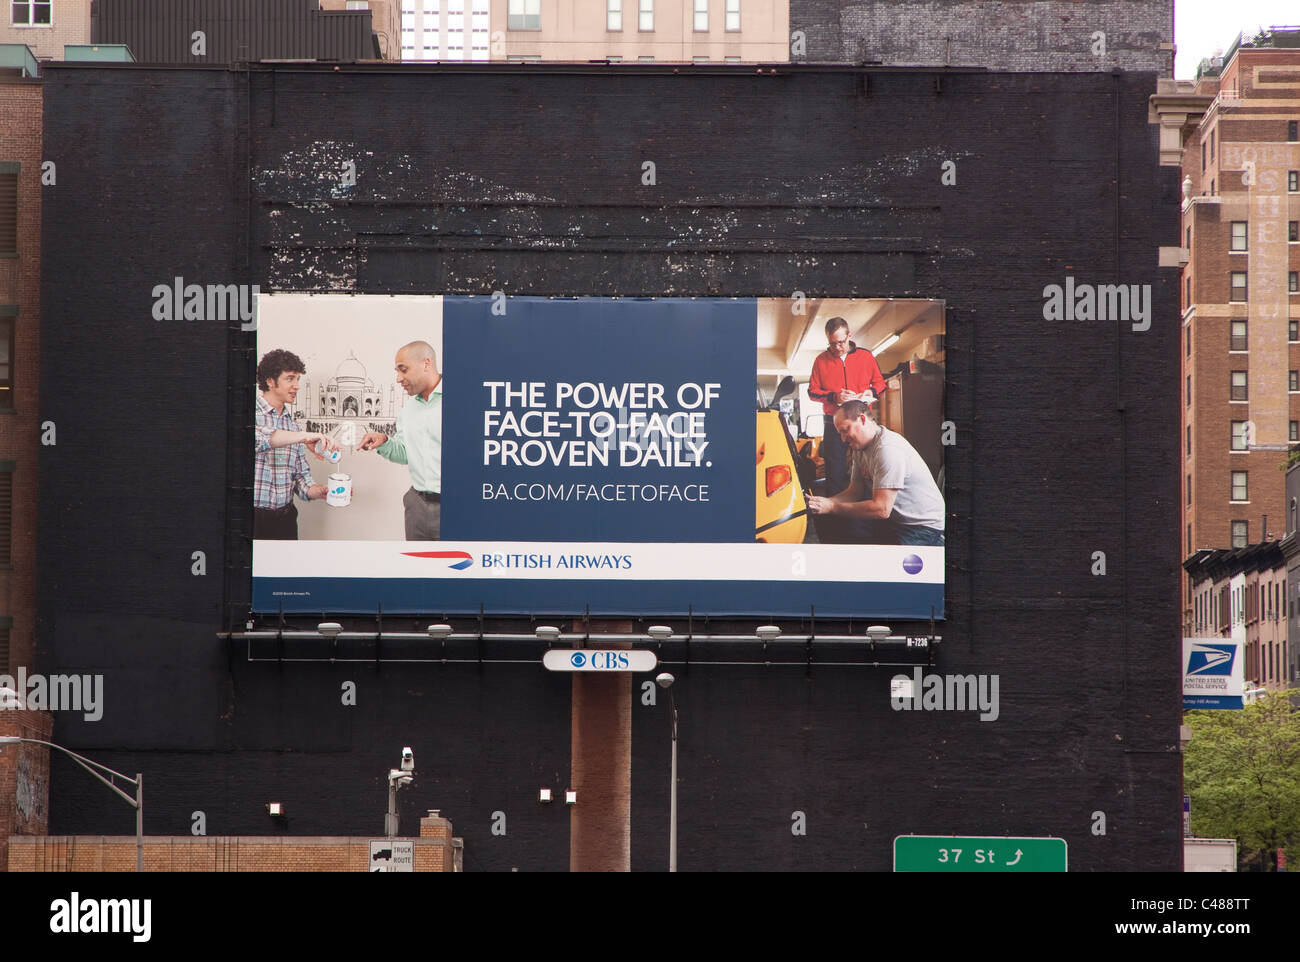 Billboard promoting face-to-face interaction among people. Stock Photo